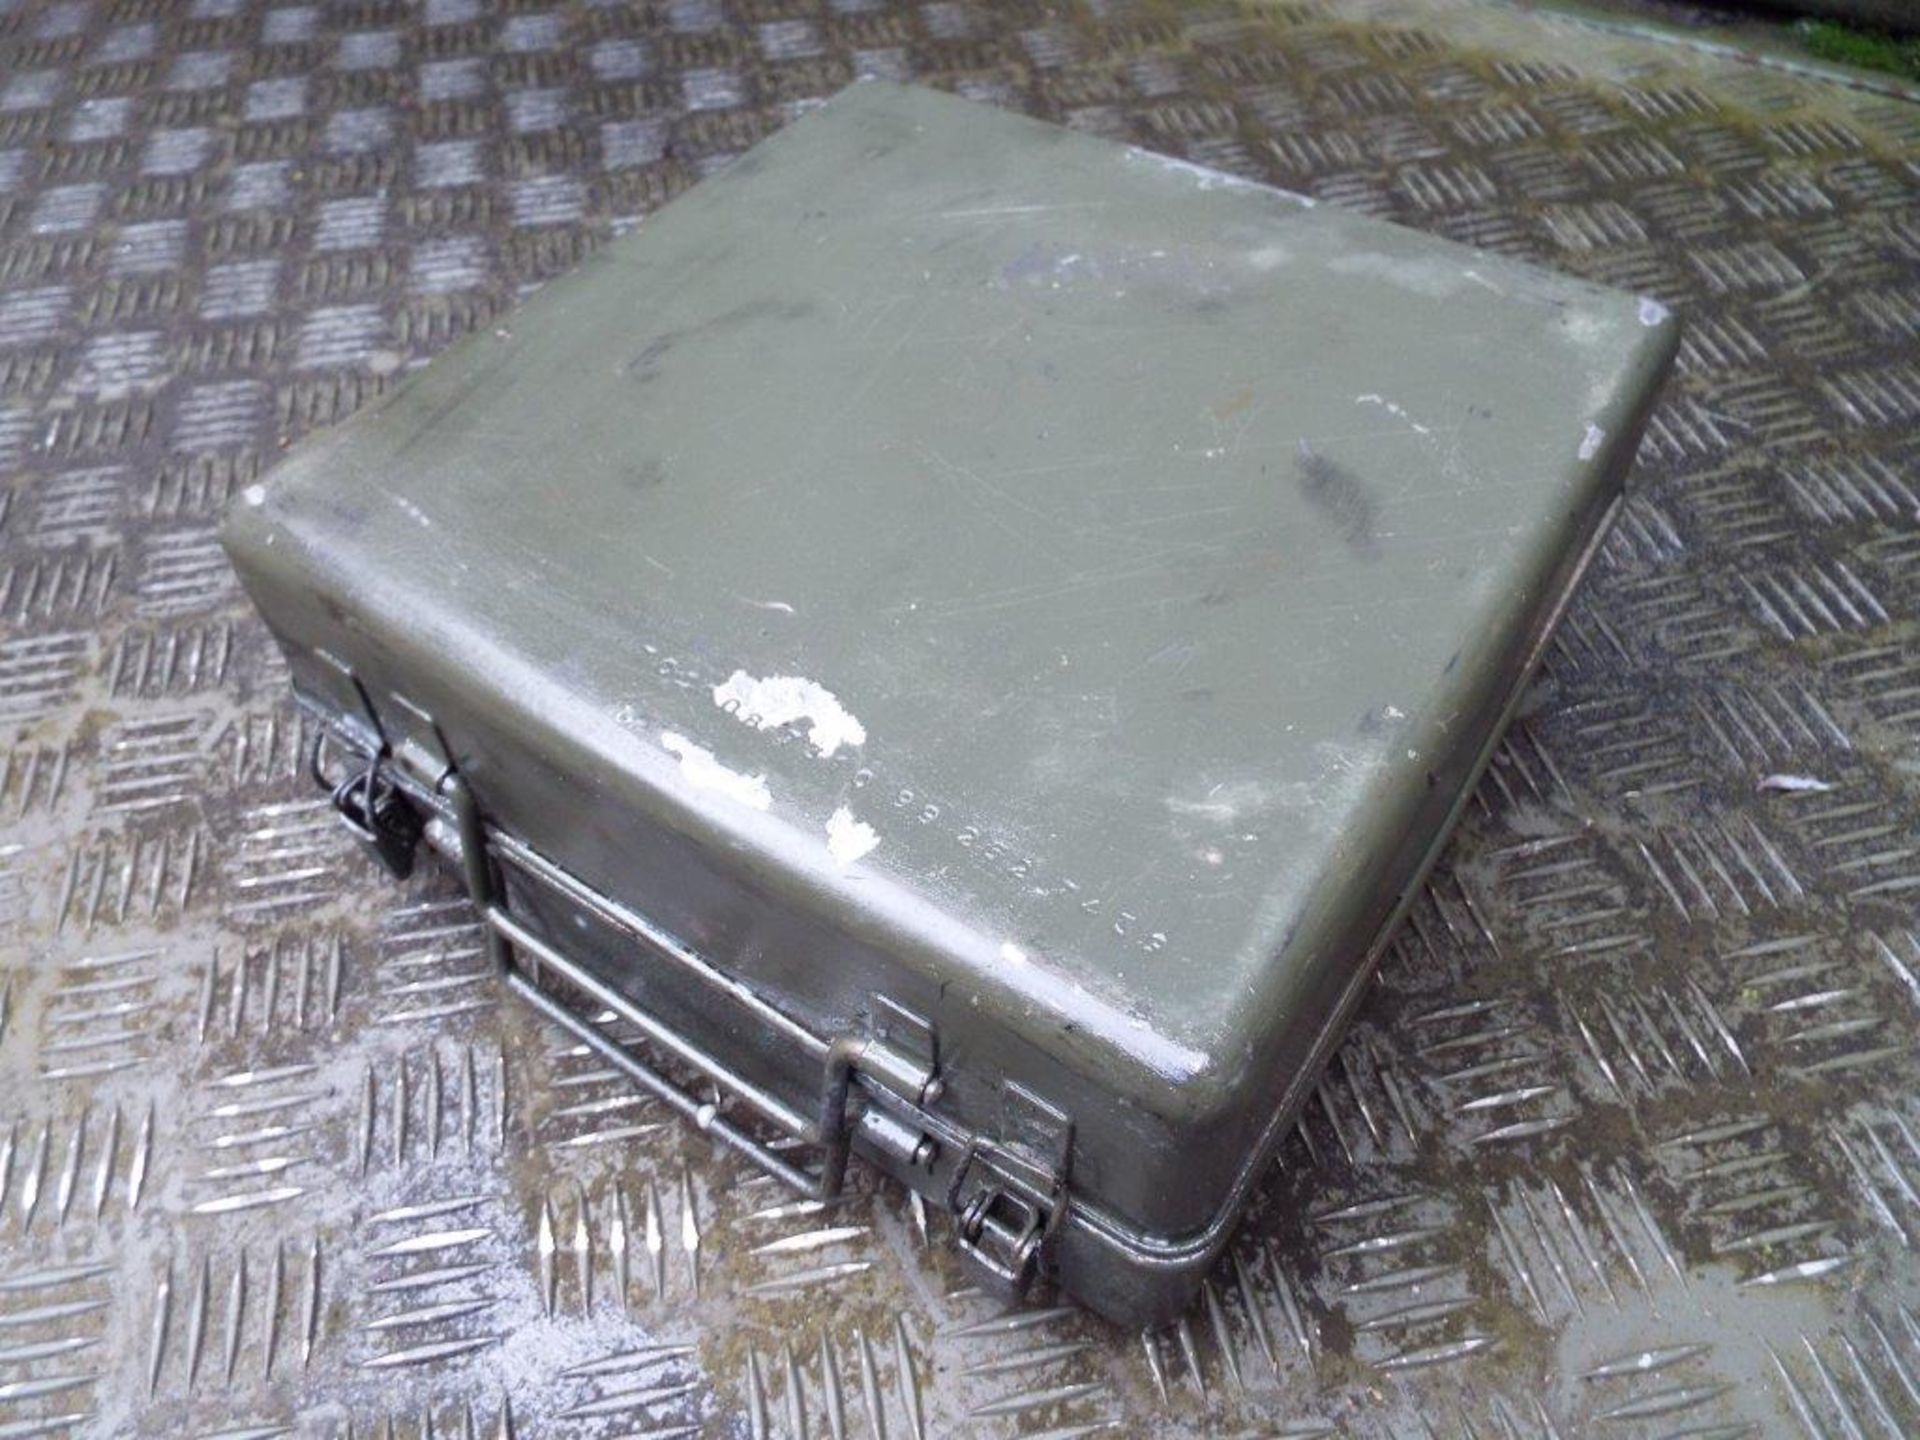 No. 12 Stove, Diesel Cooker/Camping Stove - Image 6 of 7